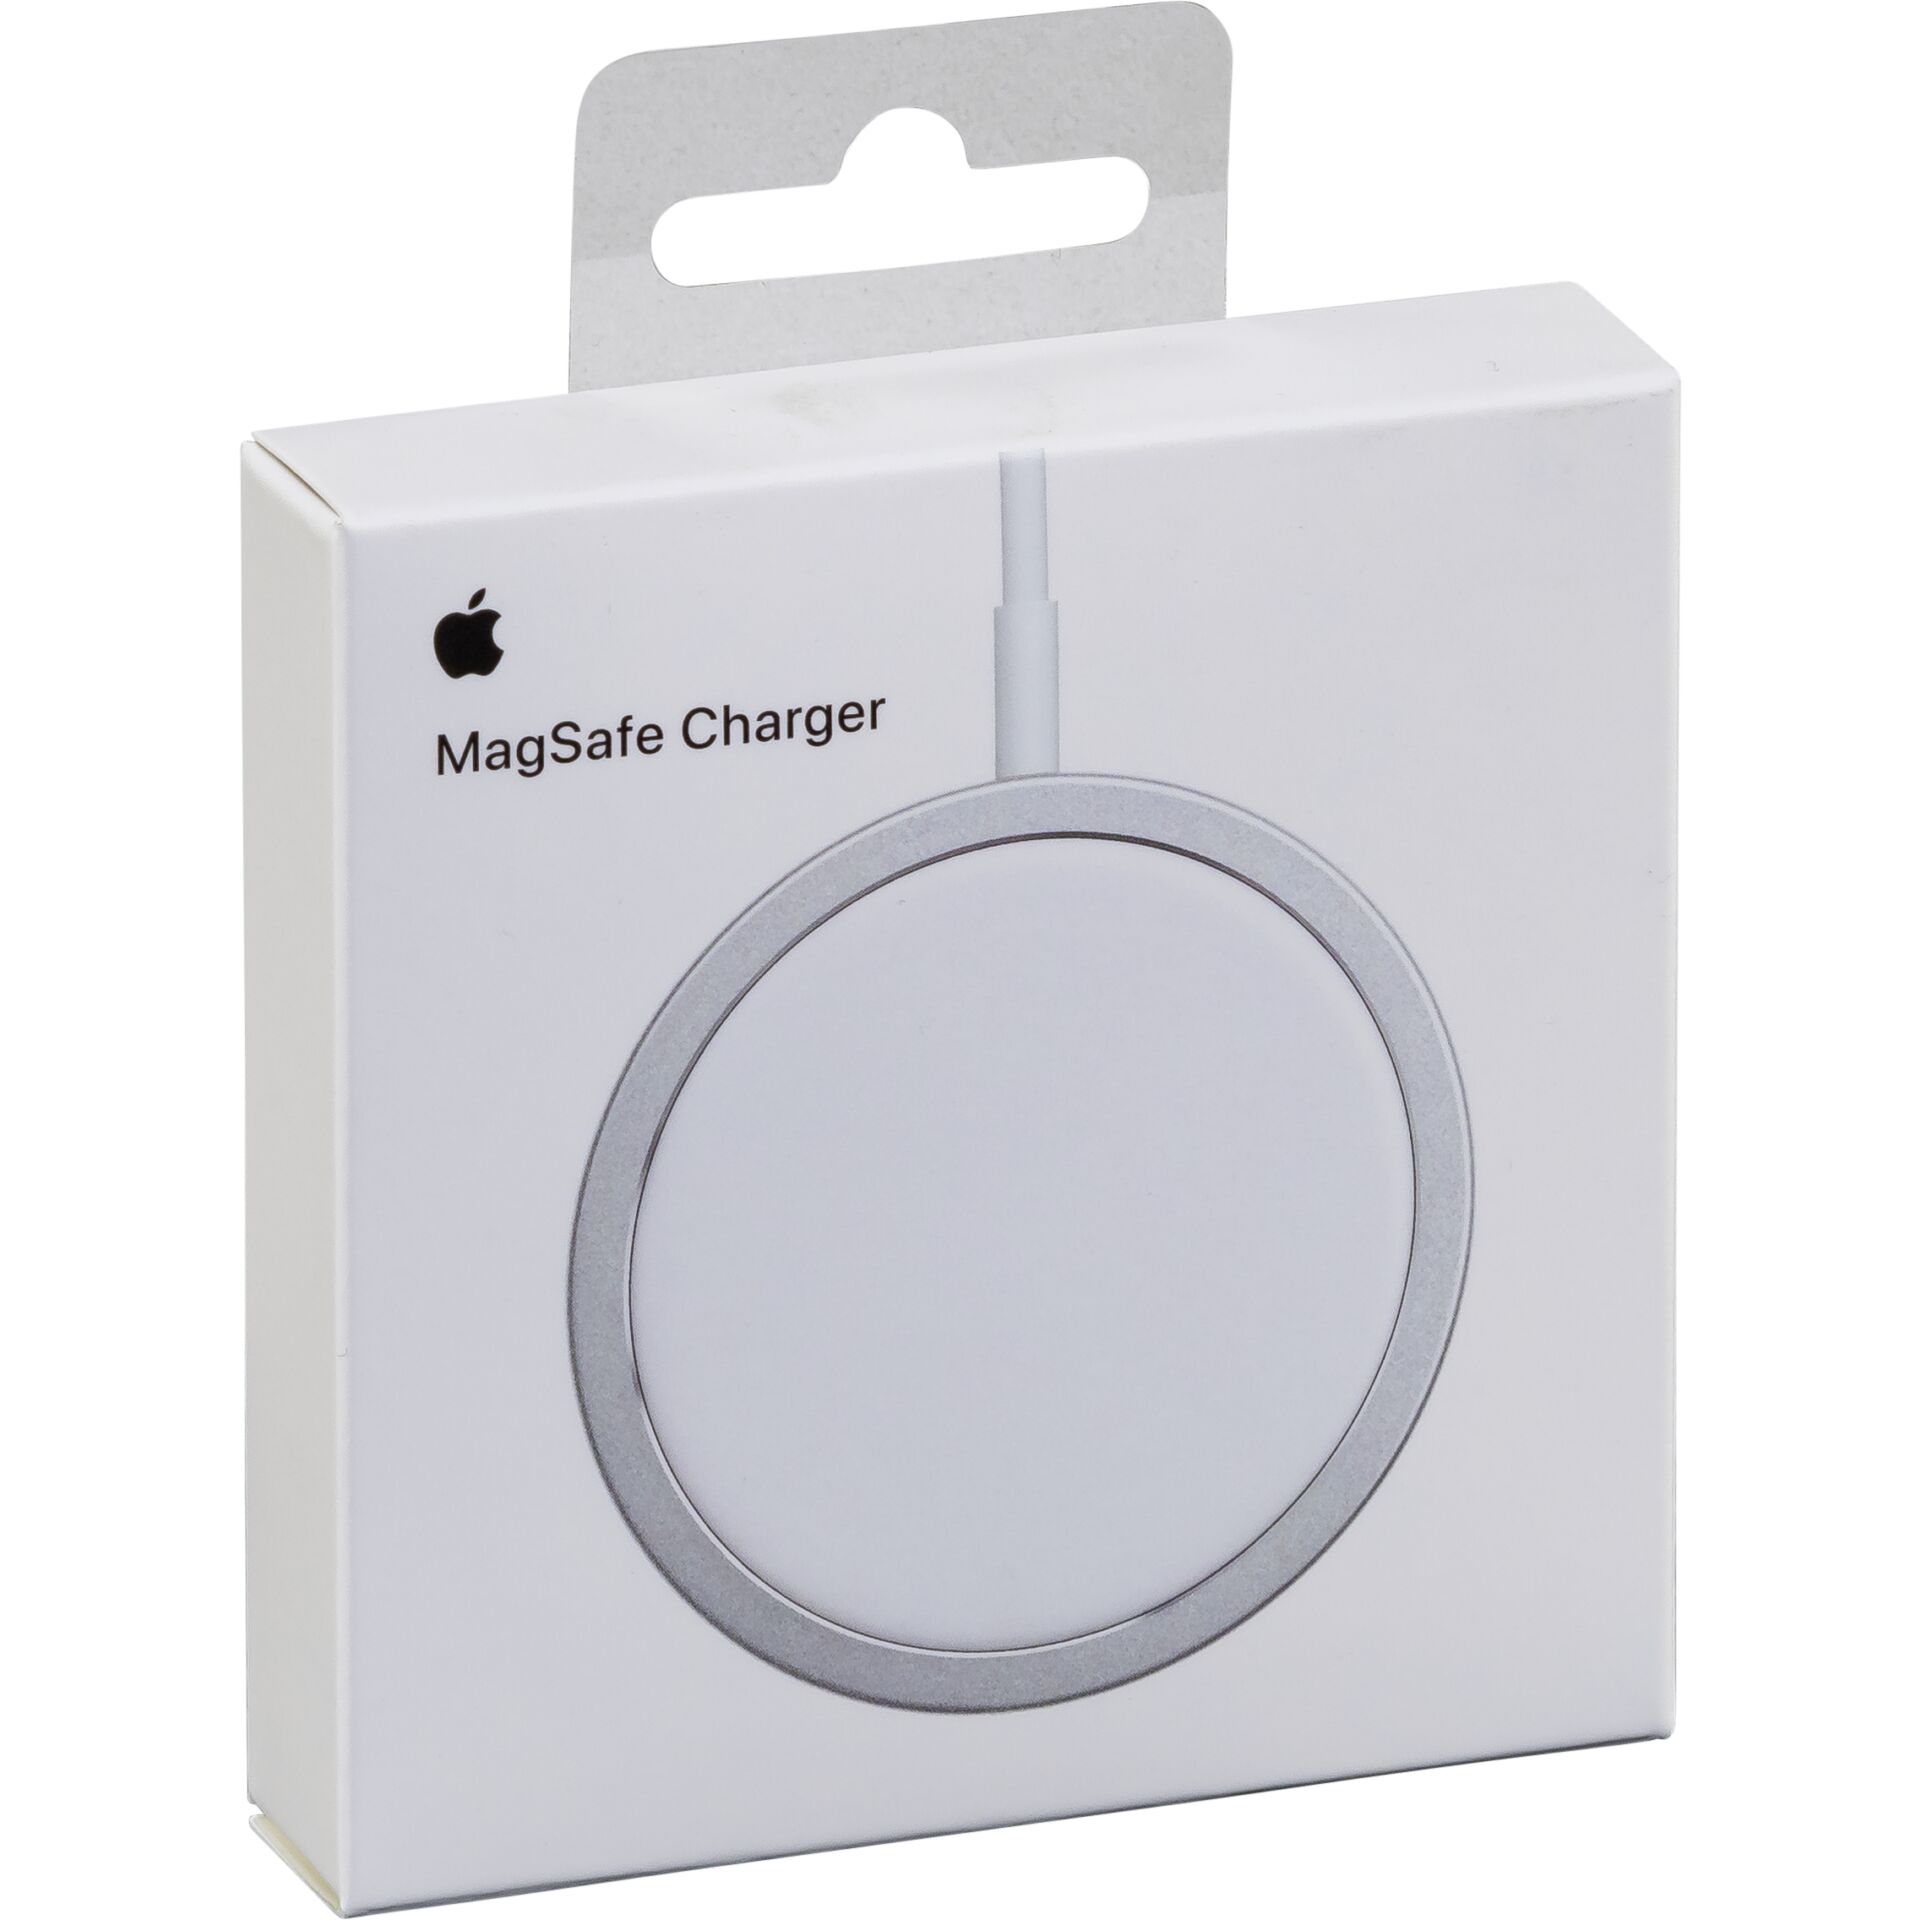 Apple -MagSafe Charger MHXH3ZM / A -Apple Hardware/Electronic  Grooves.land/Playthek